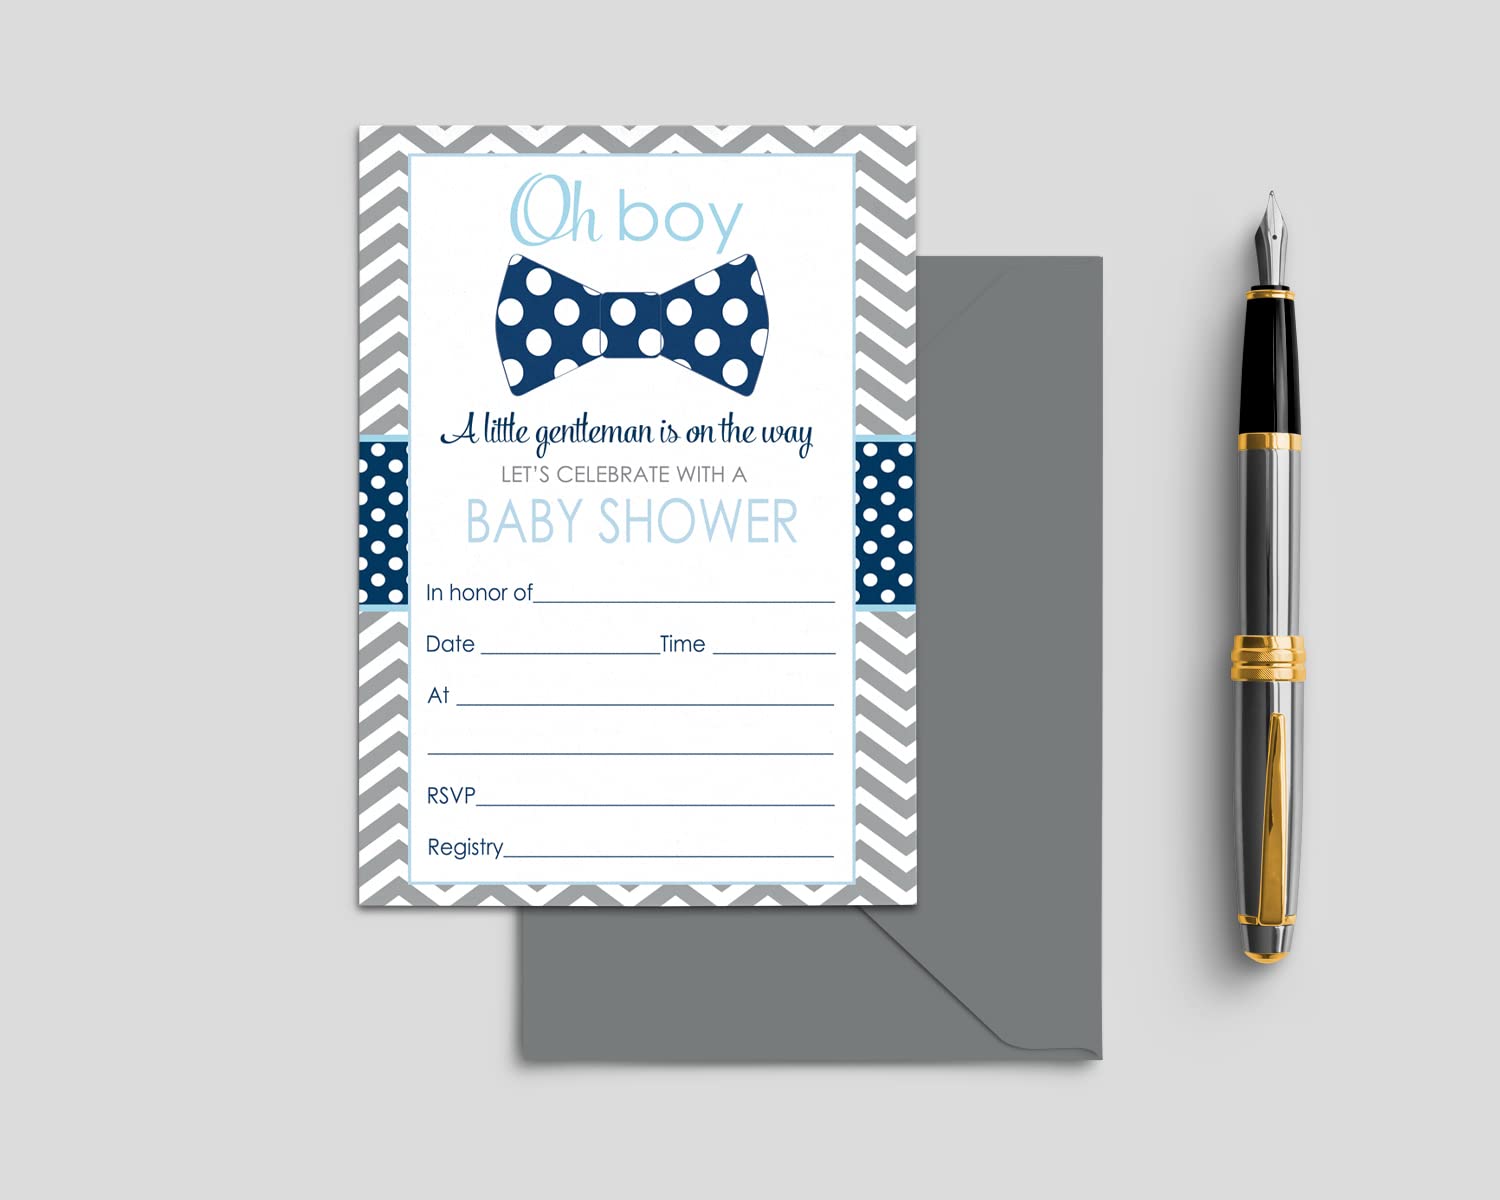 Bow Tie Baby Shower Invitations with Envelopes (15 Pack) Blank Invites for Boys Parties - Little Man Theme Blue and Grey – Blank Invite to Handwrite Custom Details - 4x6 Printed Card Set